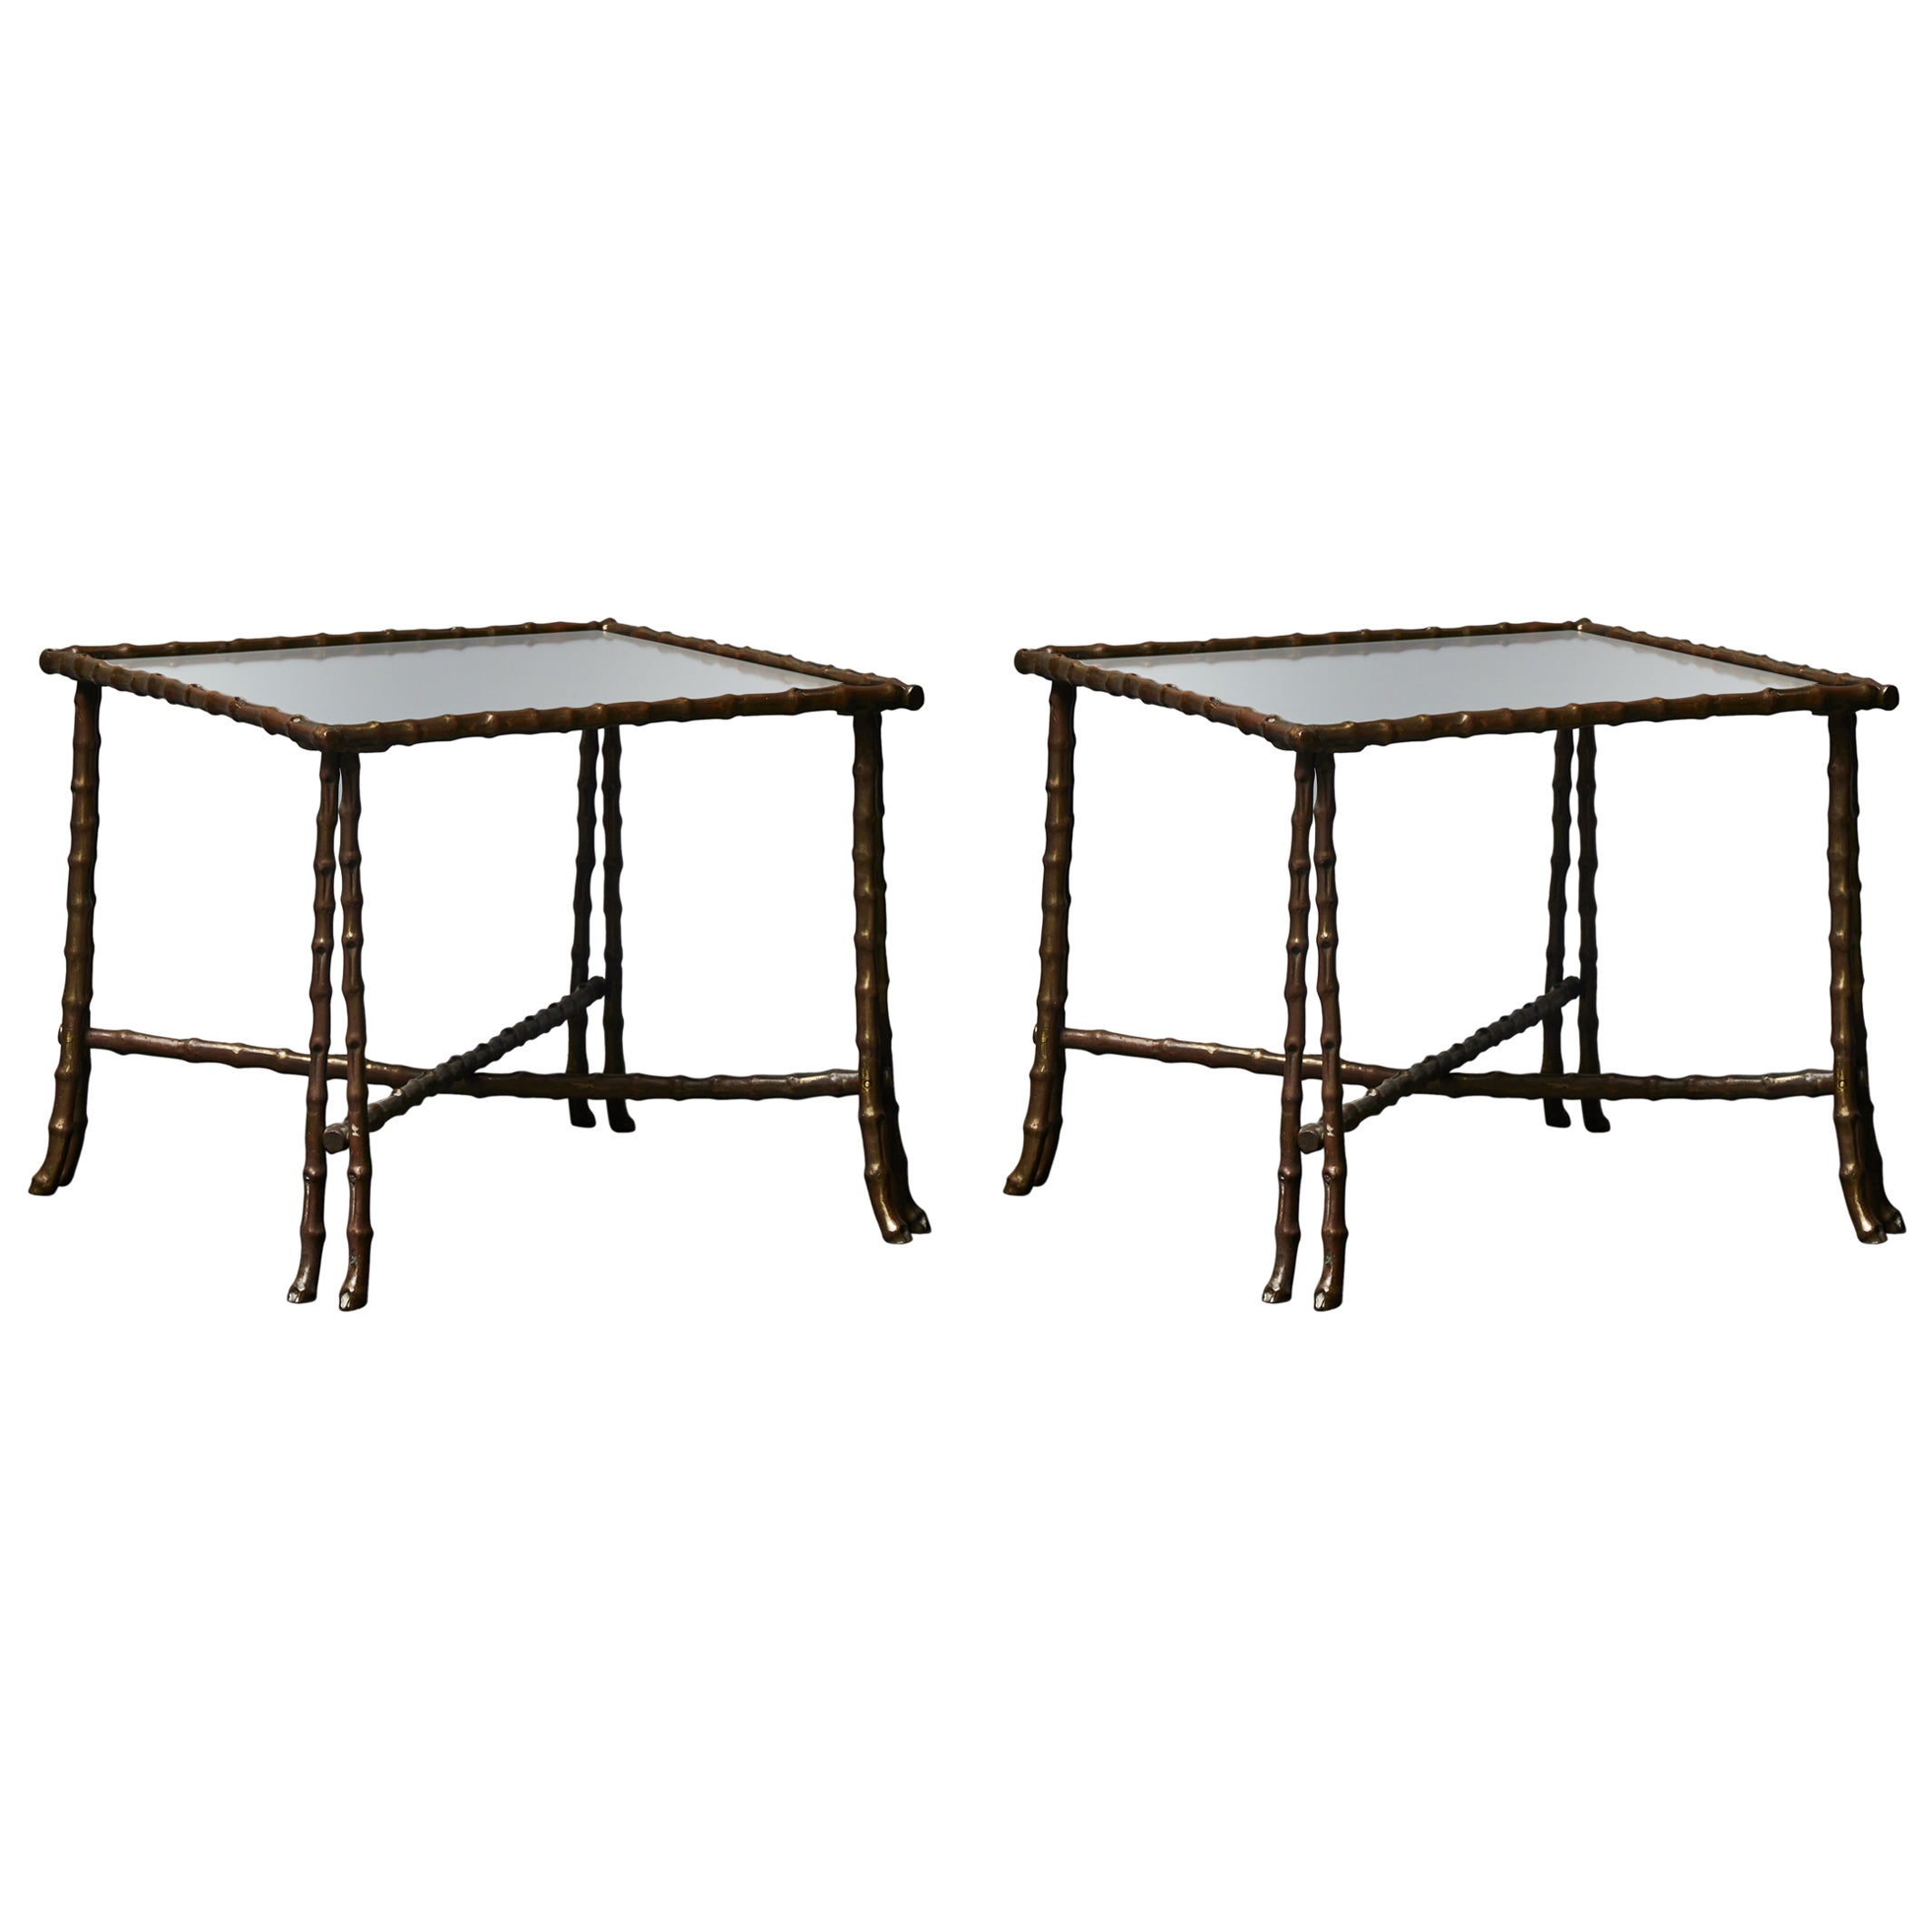 Pair of Pedestals by Bagues at Cost Price